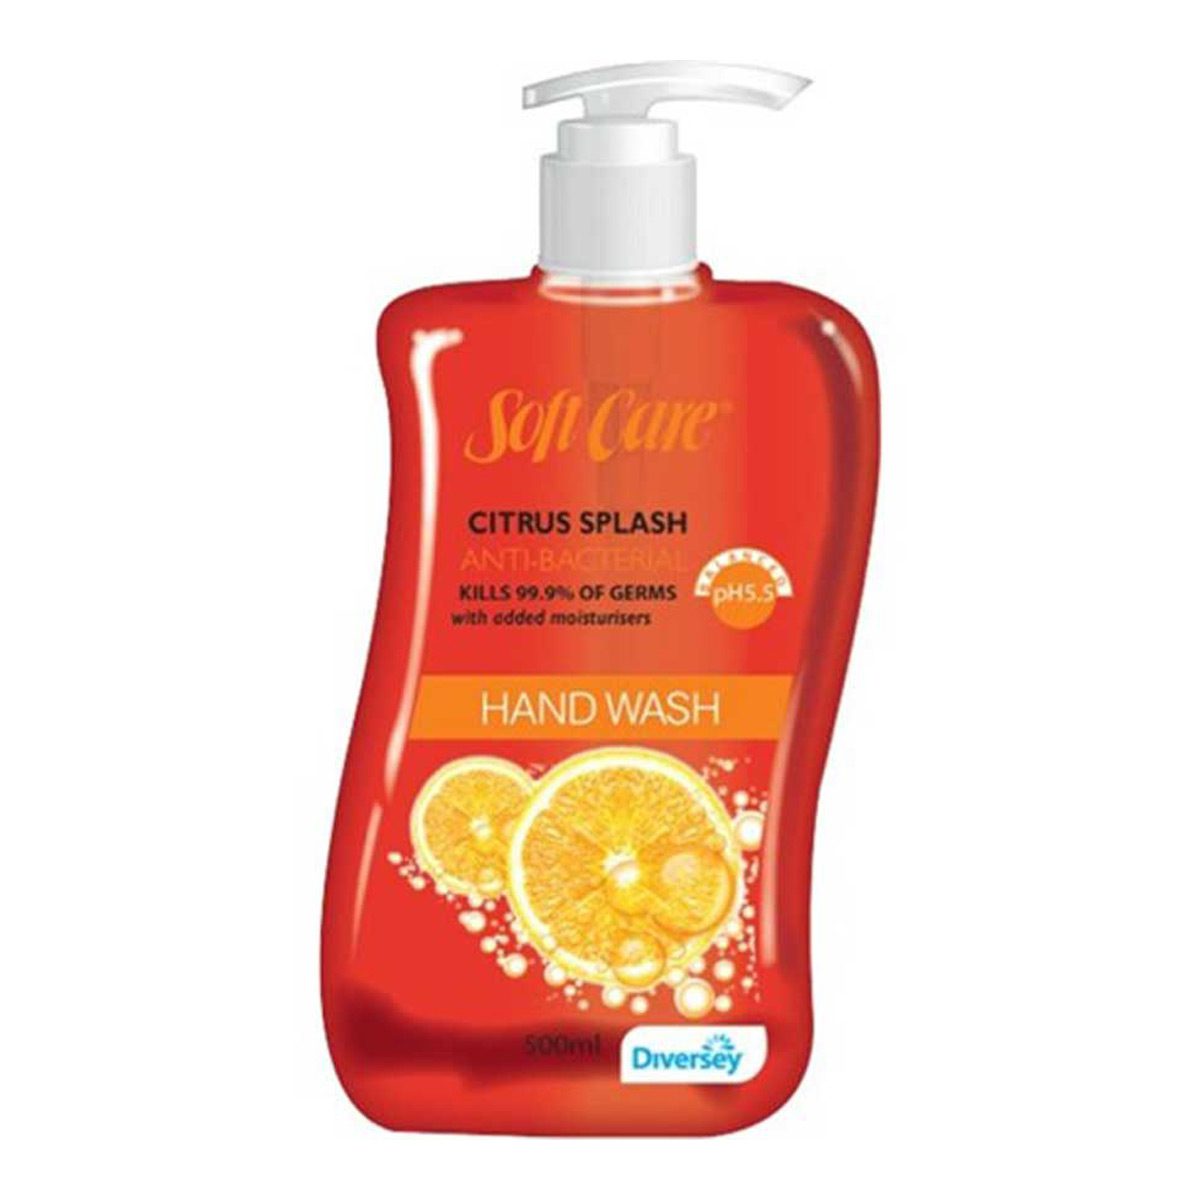 washroom-skincare-hand-soap-diversey-softcare-citrus-antibacterial-soap-500ml-removes-bacteria-kills-99.9%-germs-hypoallergenic-dermatologically-tested-non-toxic-pH-balanced-vjs-distributors-4378730